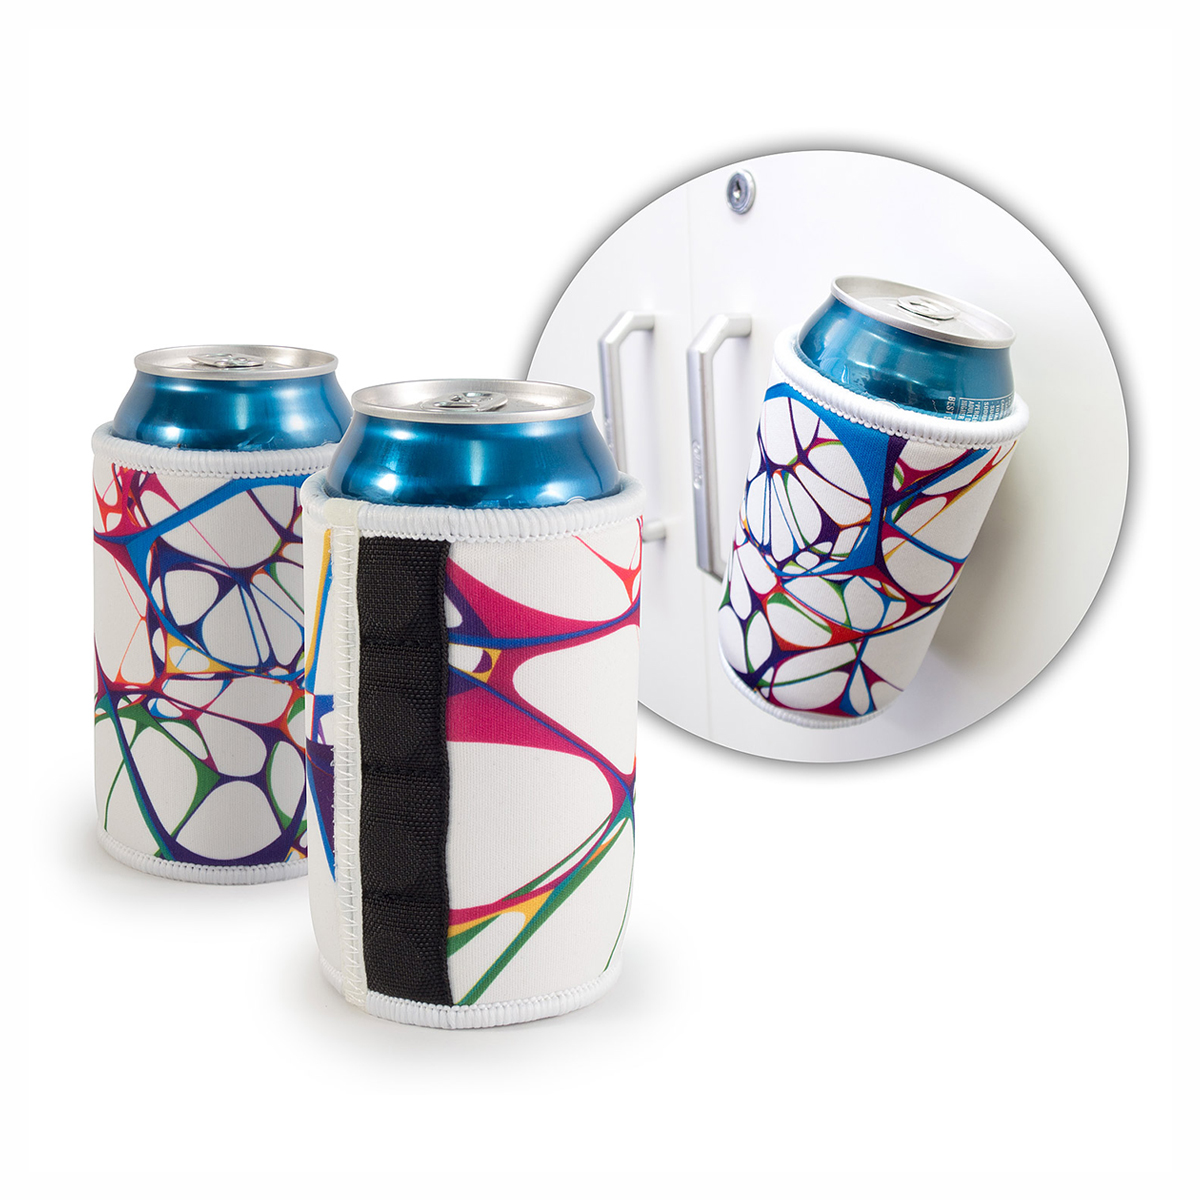 elevate stubby holders available